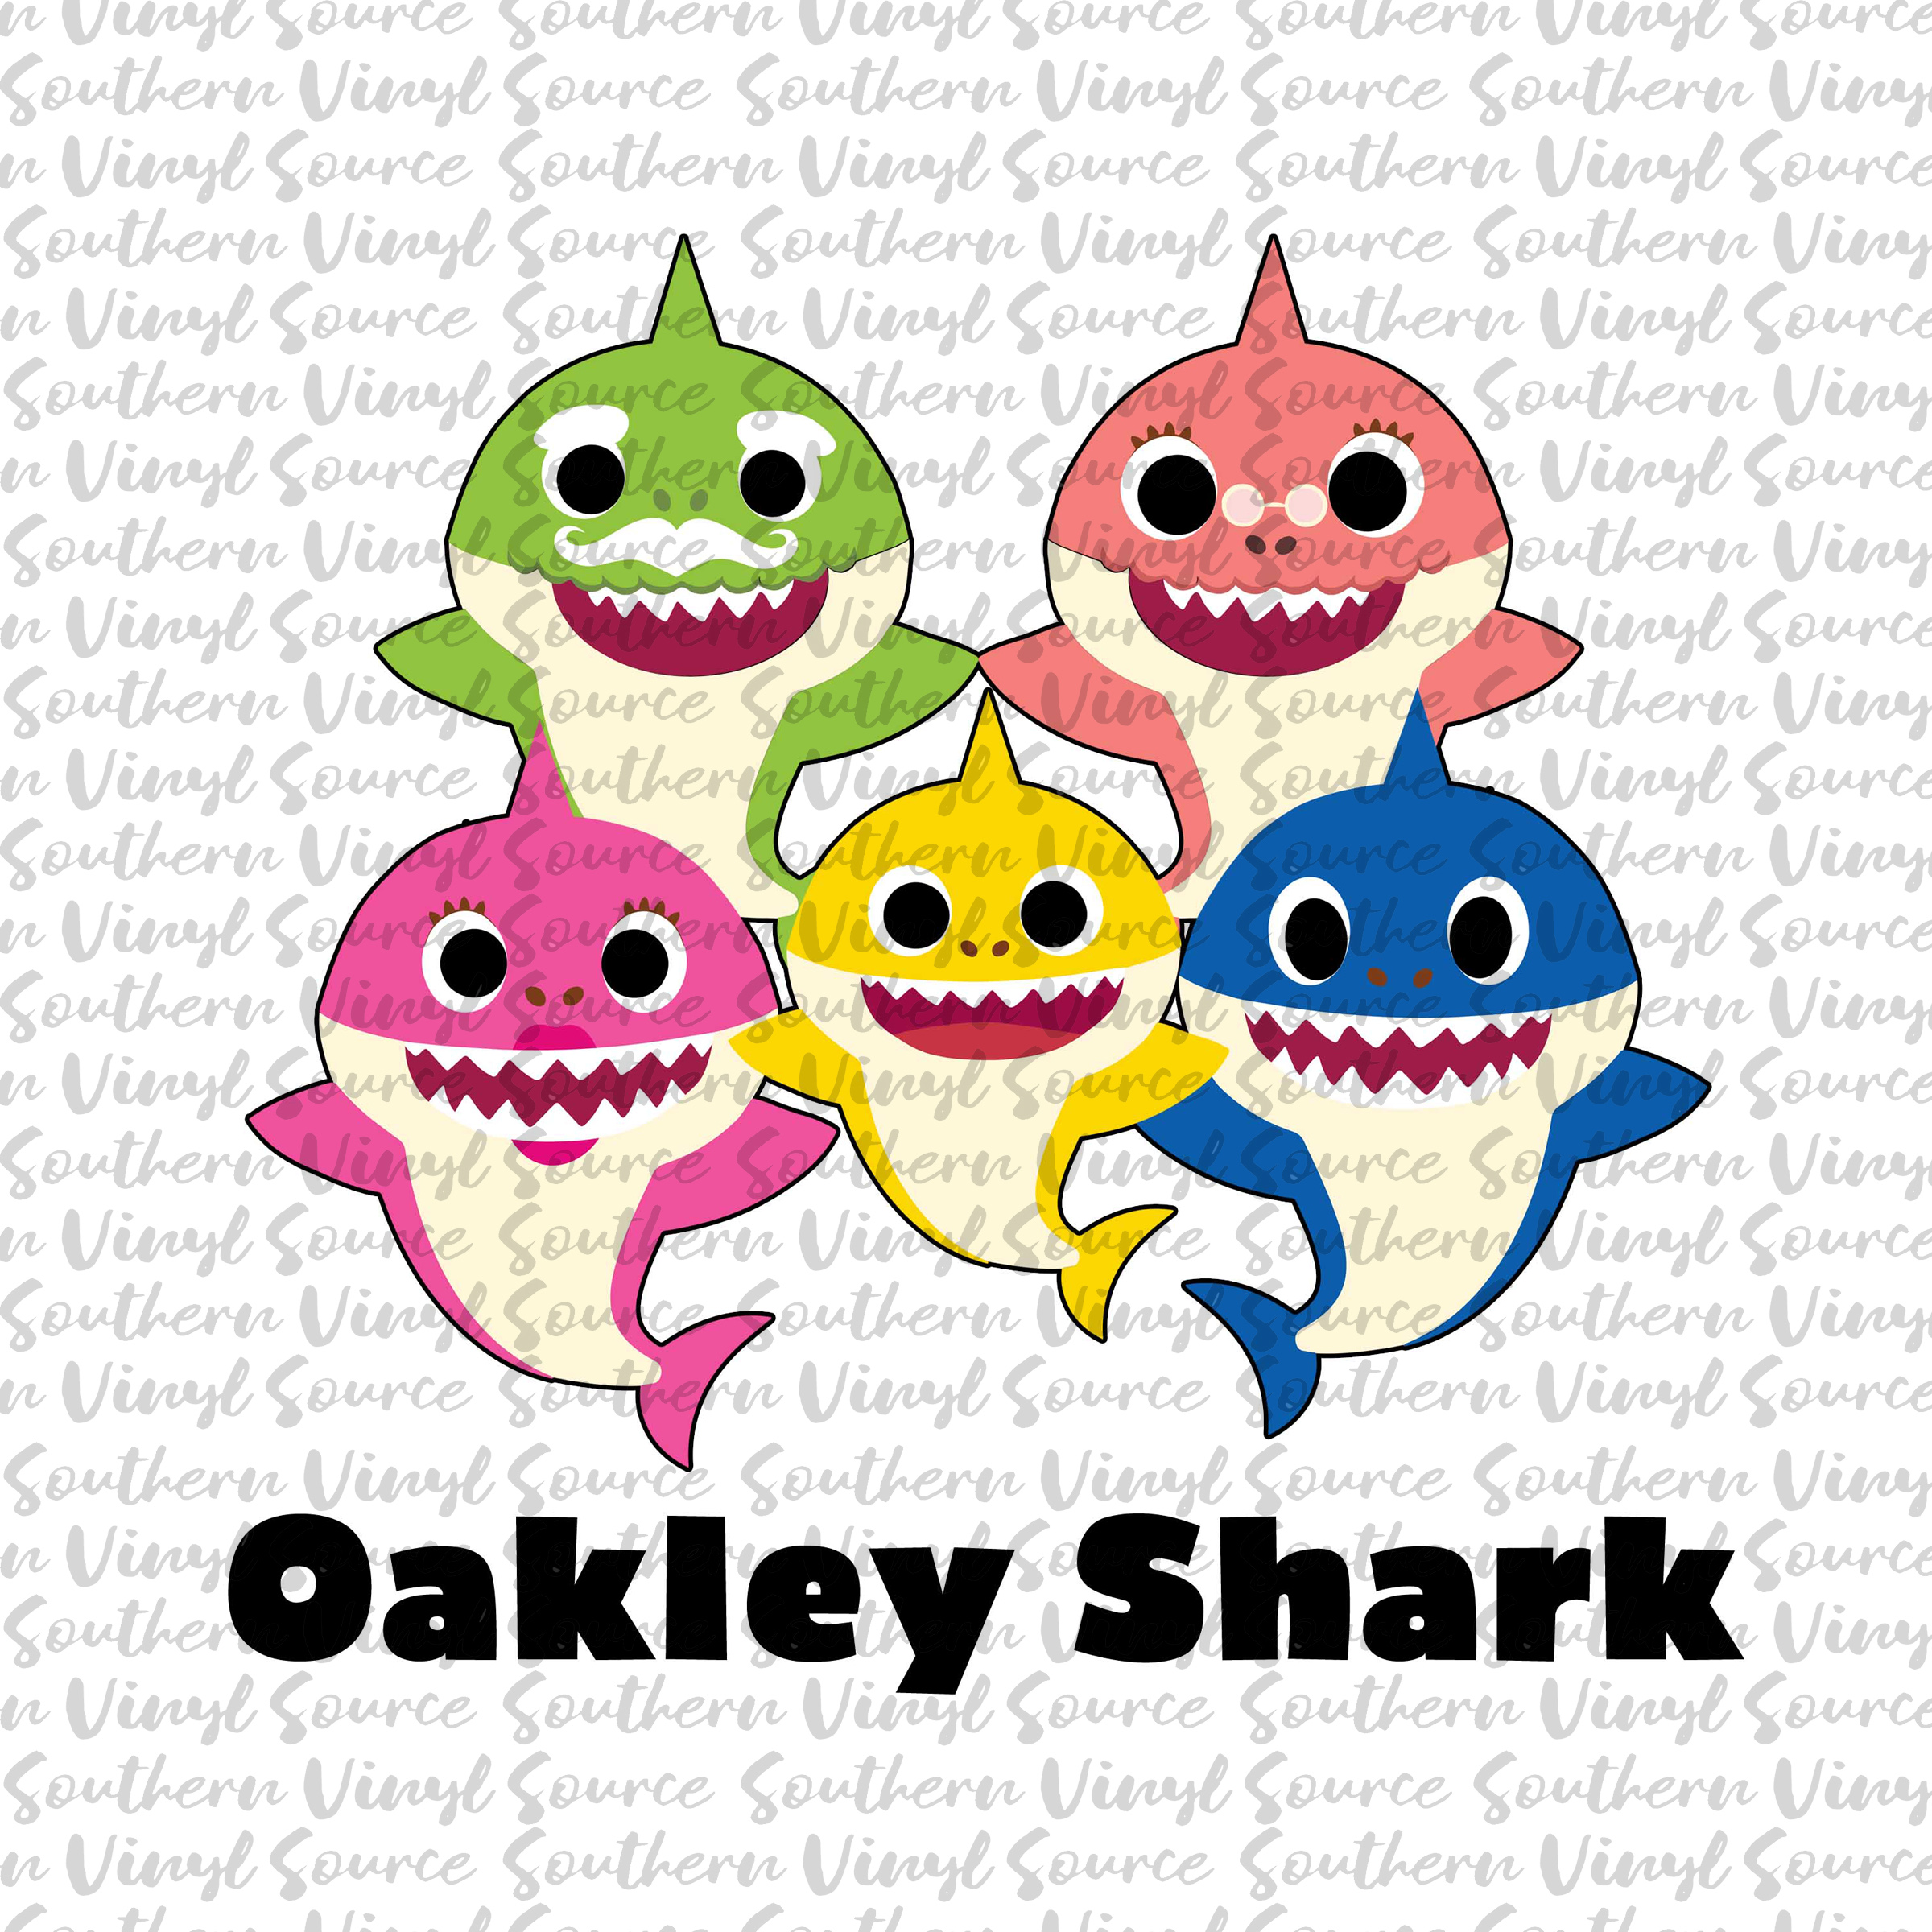 0150 Personalized Baby Shark Family Sublimation Print Southern Vinyl Source